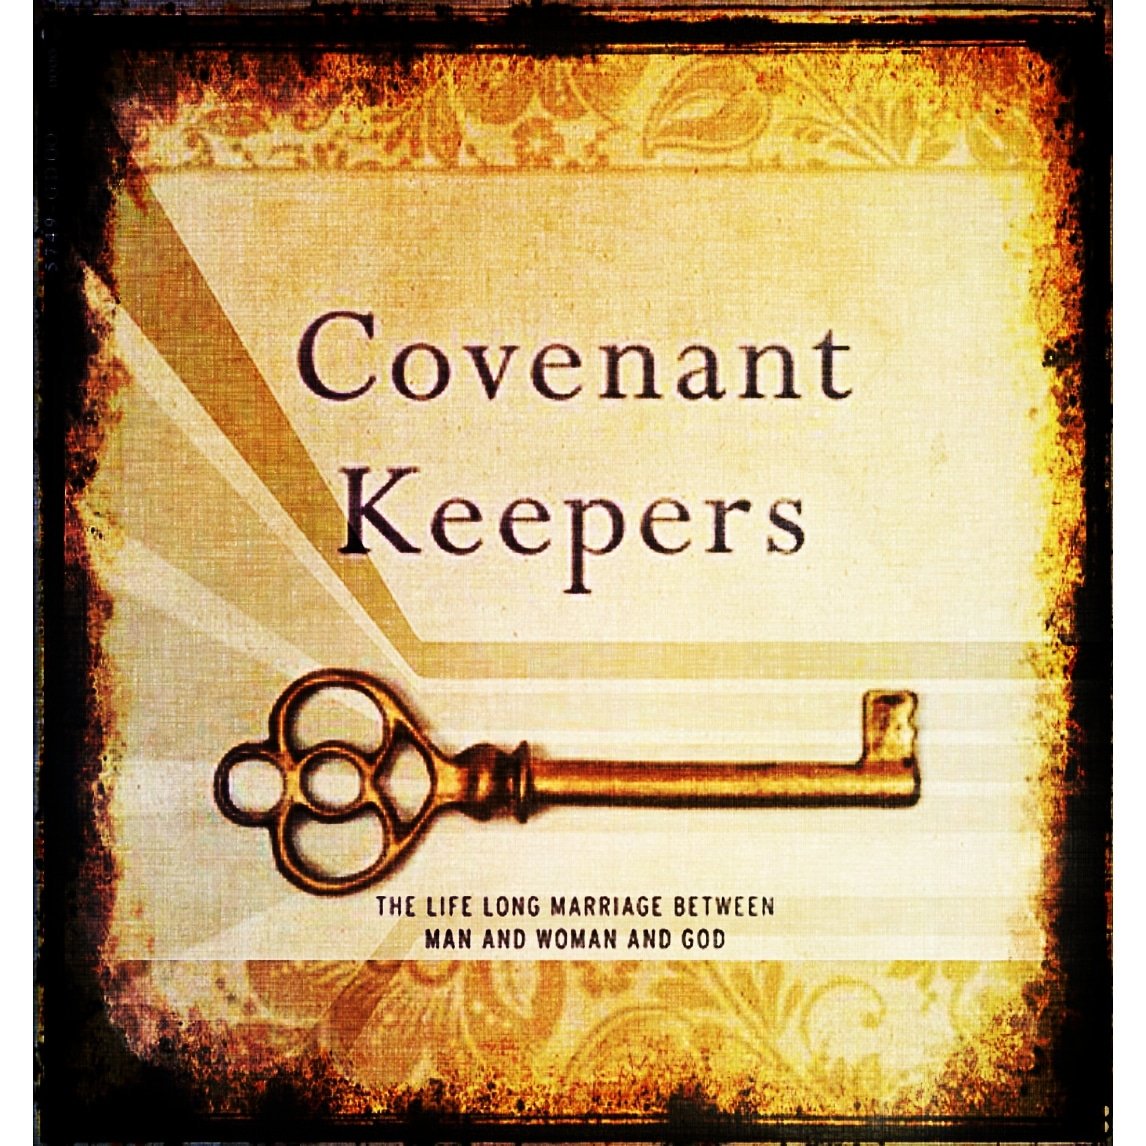 #Covenant Duty: A #husband's duty is to see the #covenant #beauty in his #wife.
#STEELYourMind #InkWellSpoken #CovenantRelationships #HusbandsAndWives #HusbandAndWife #MarriageCovenant #marriage